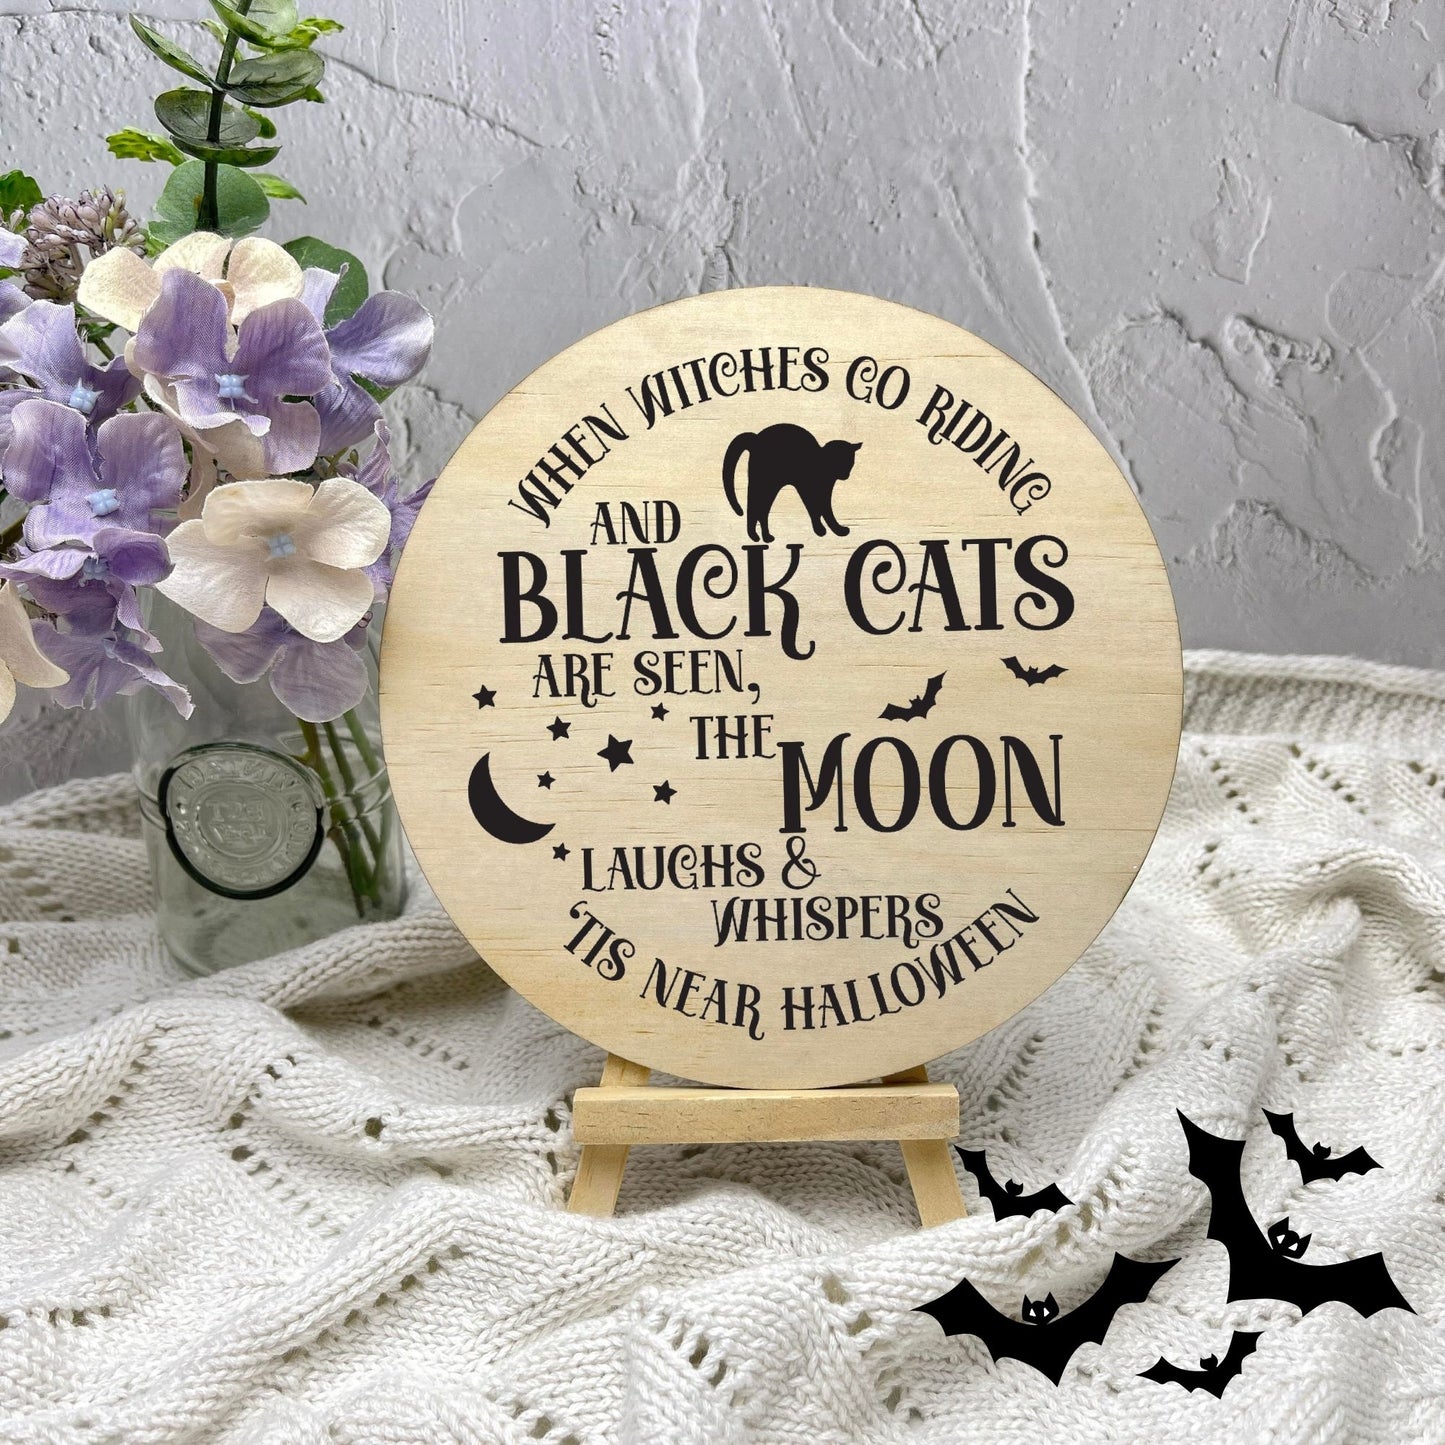 Black cat on the moon sign, Halloween Decor, Spooky Vibes, hocus pocus sign, trick or treat decor, haunted house h60